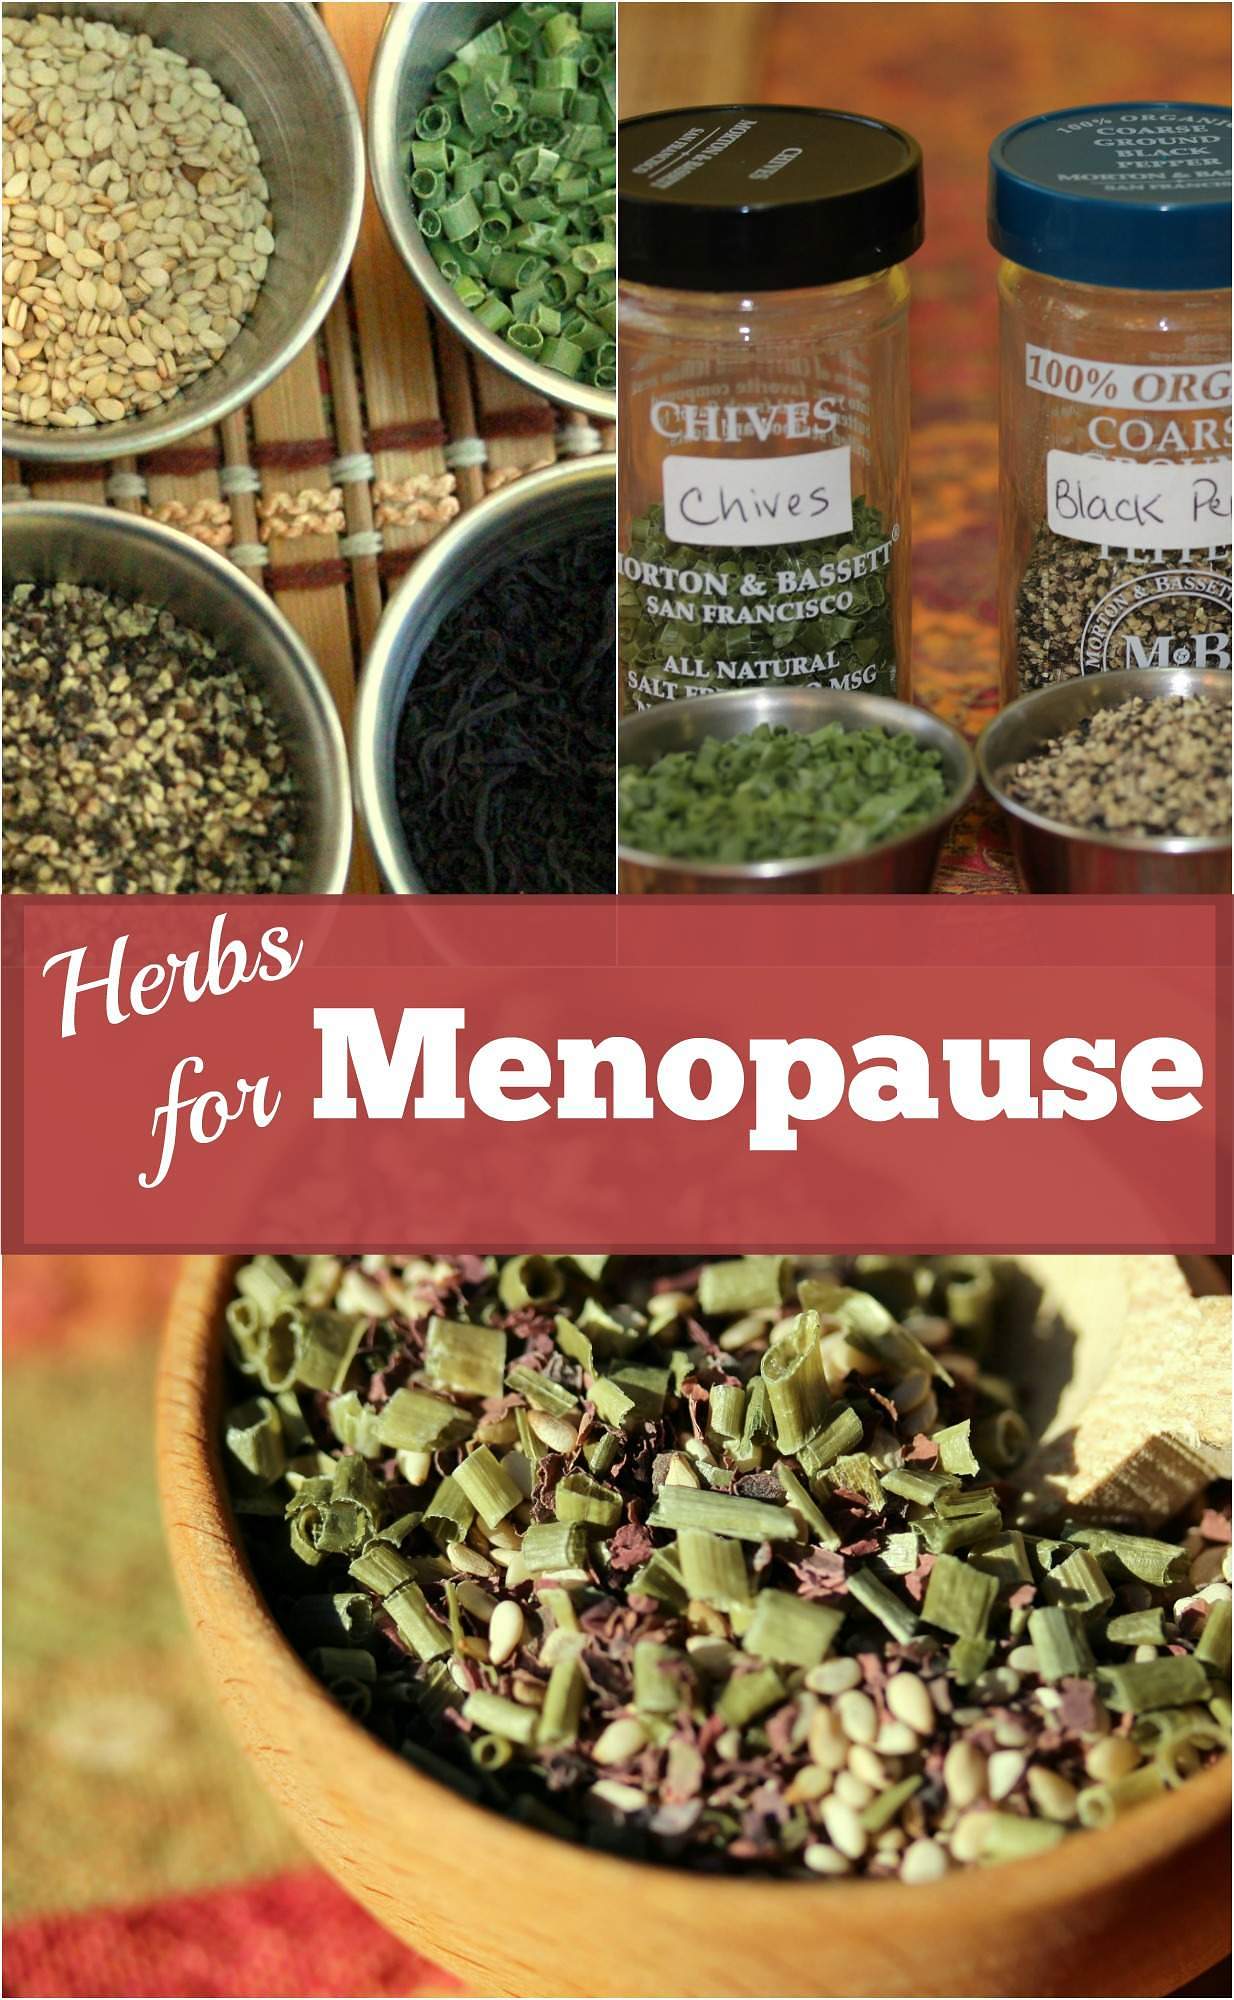 Herbs for Menopause